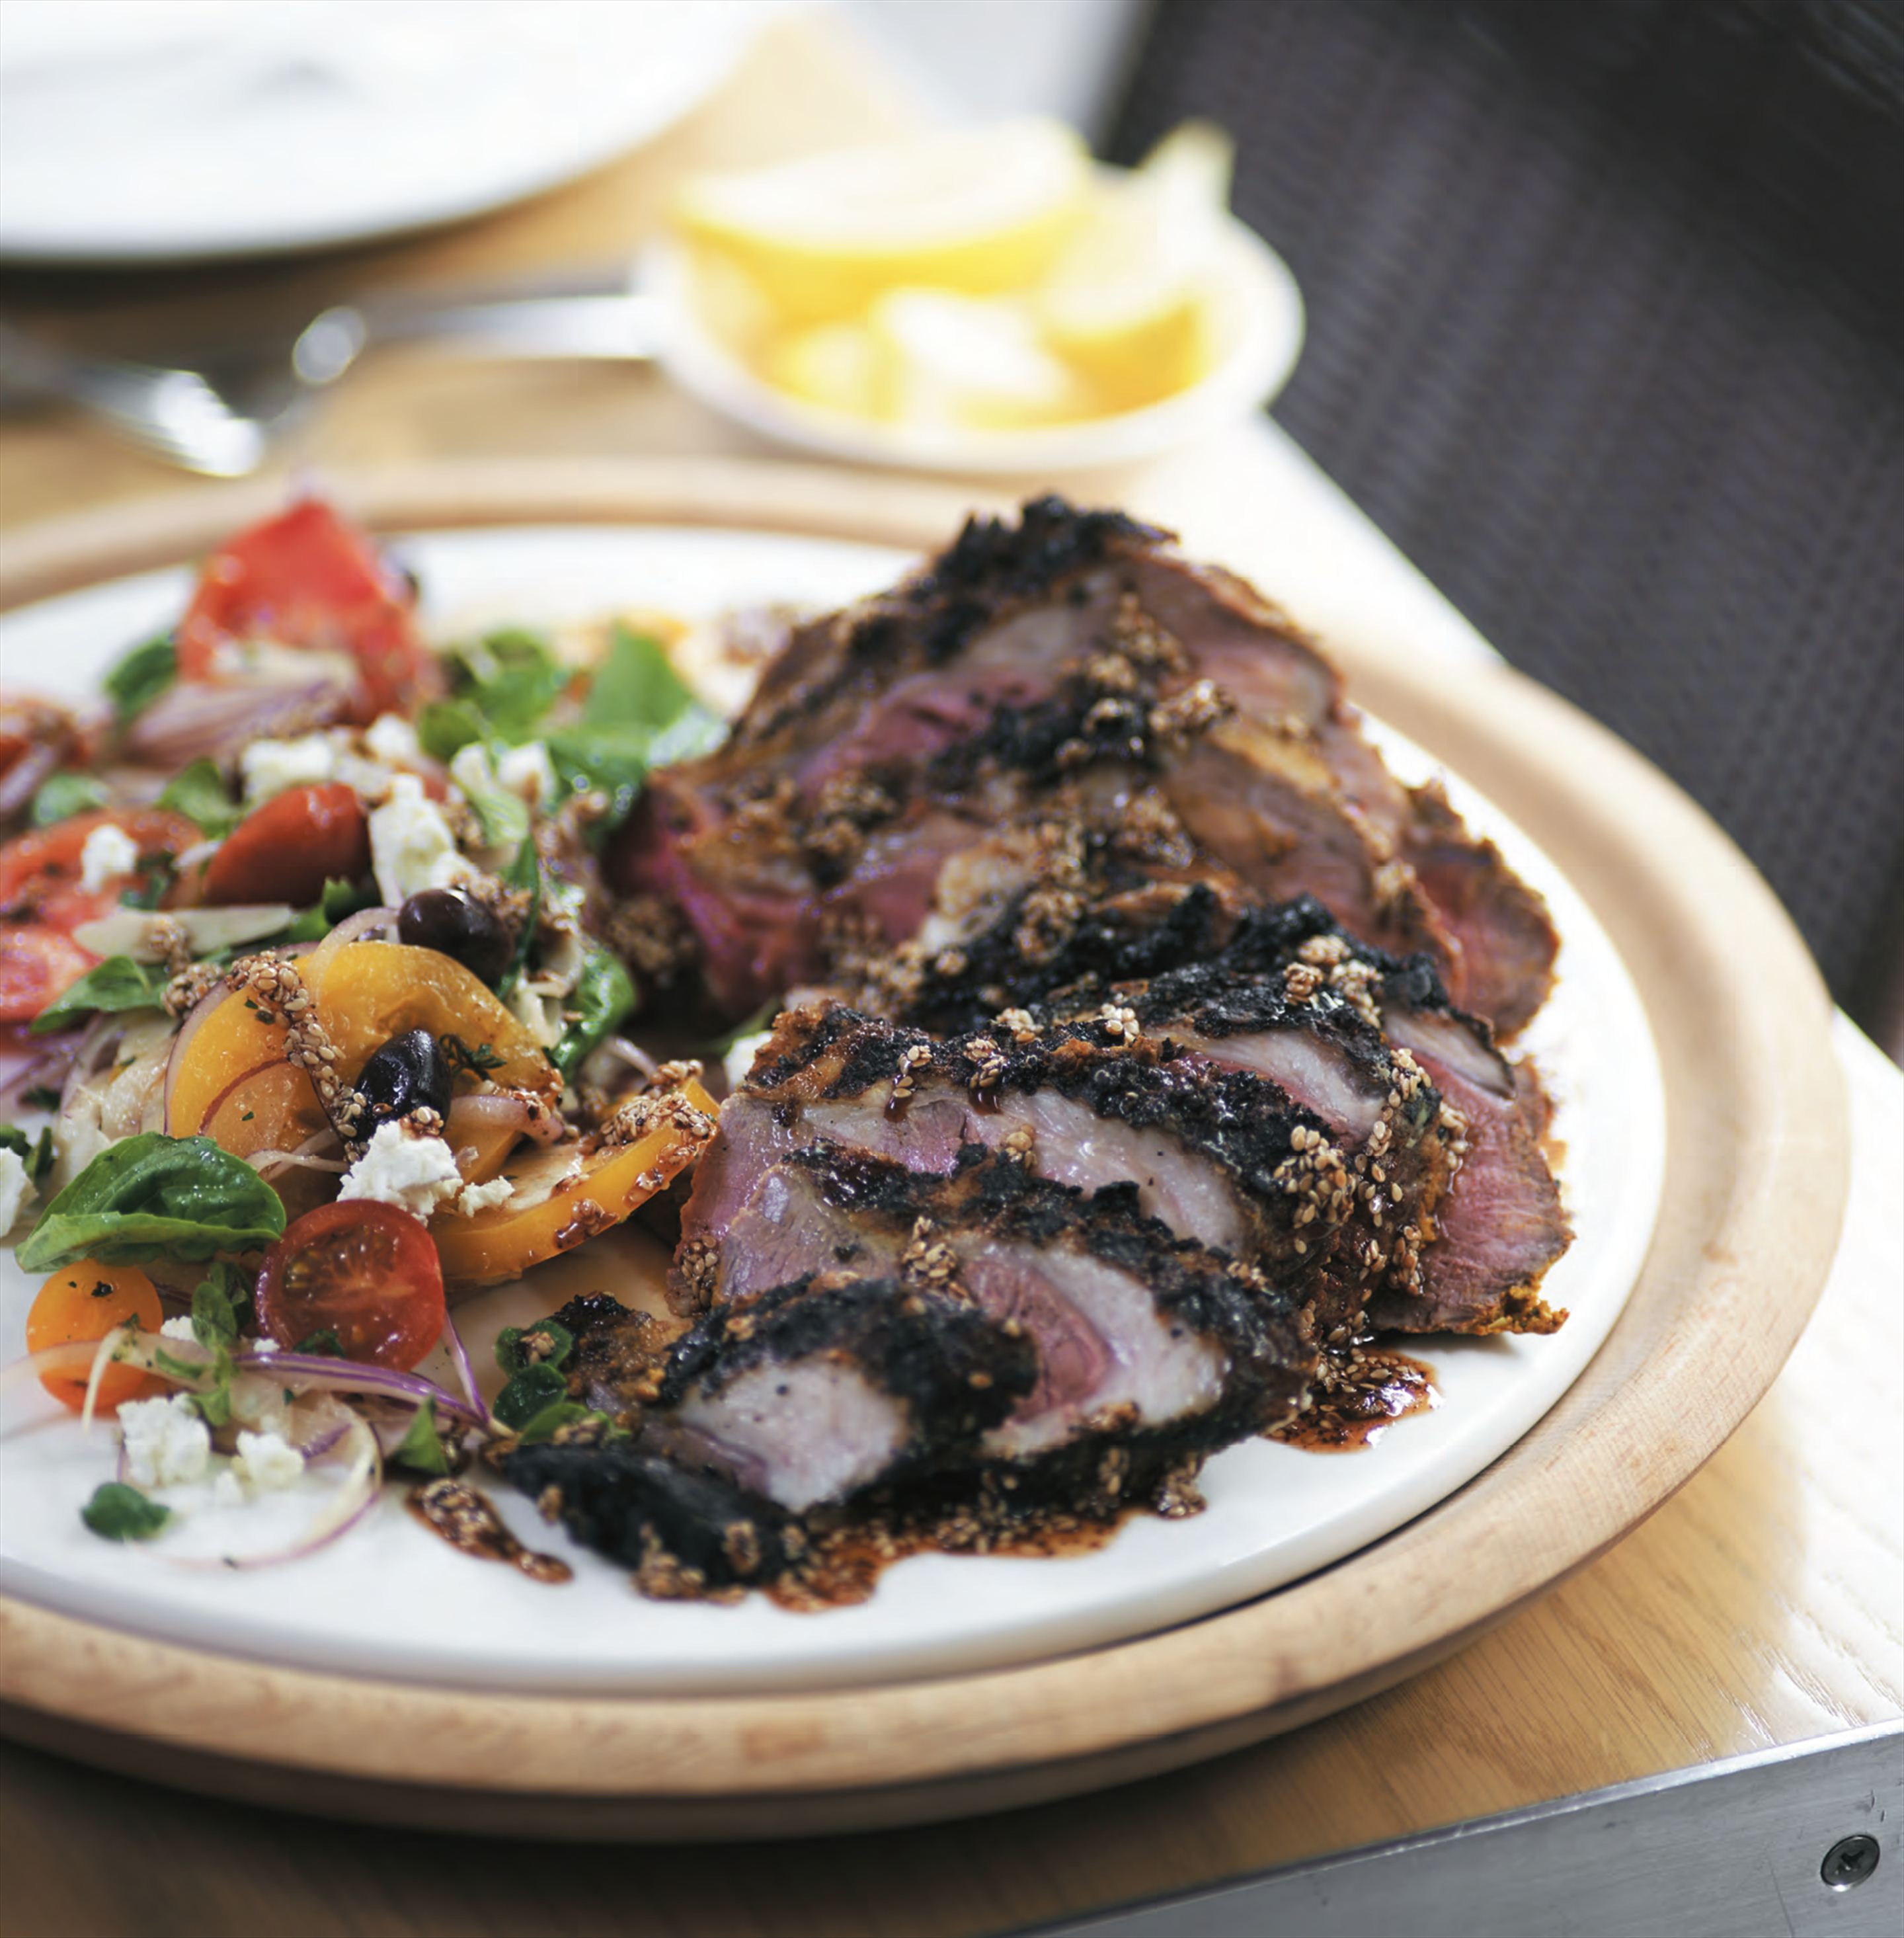 Barbecued butterflied leg of lamb with Lebanese tomato salad